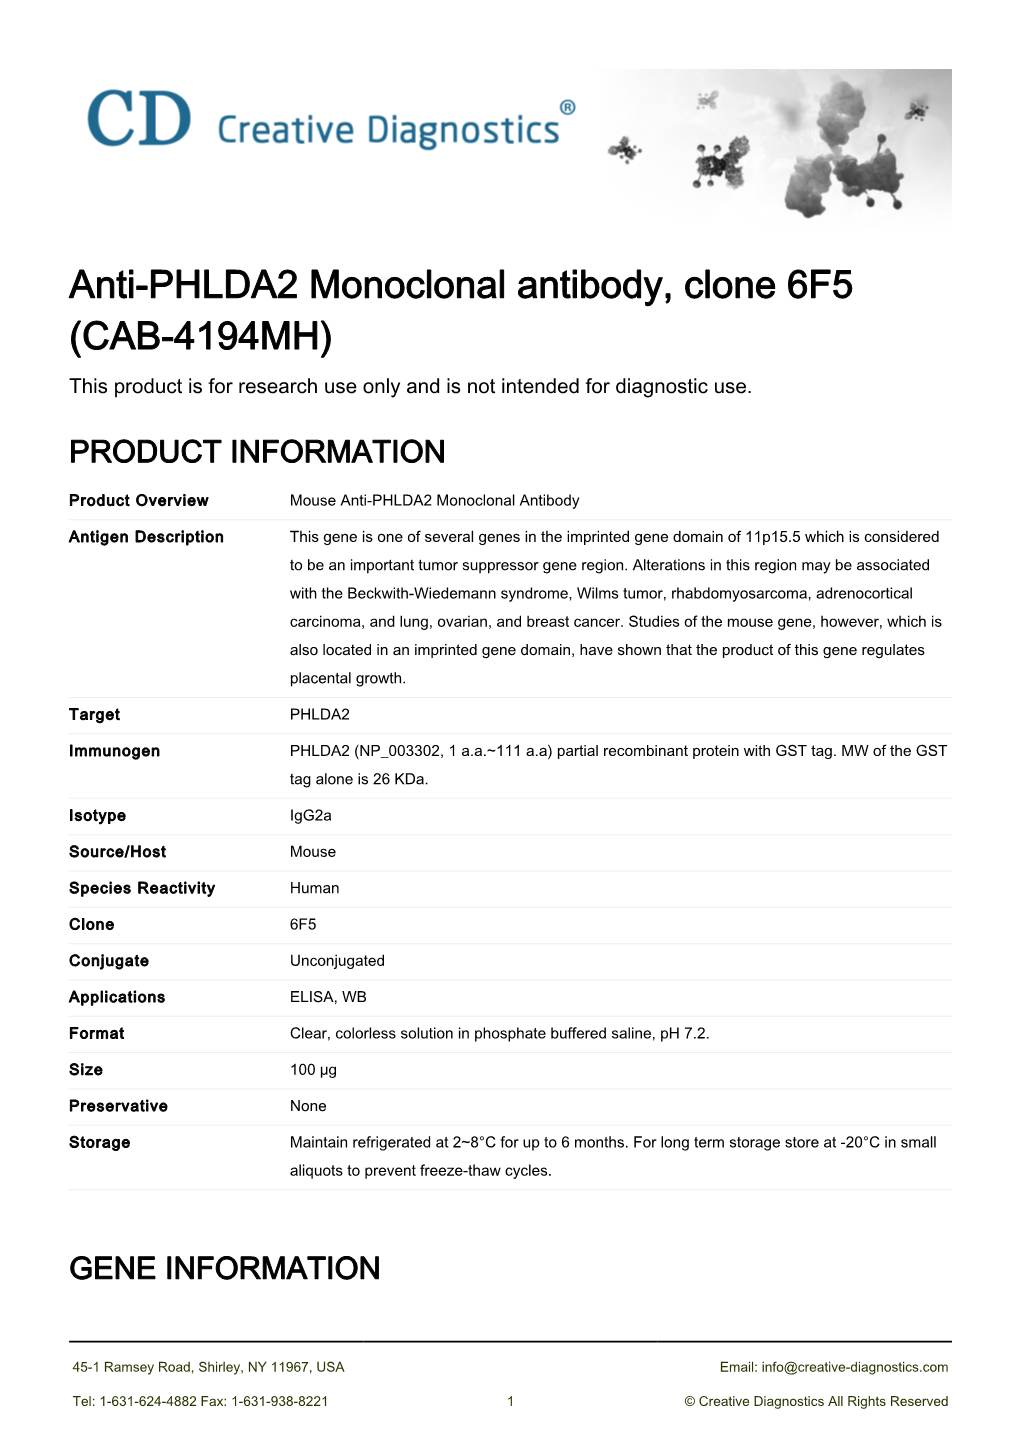 Anti-PHLDA2 Monoclonal Antibody, Clone 6F5 (CAB-4194MH) This Product Is for Research Use Only and Is Not Intended for Diagnostic Use